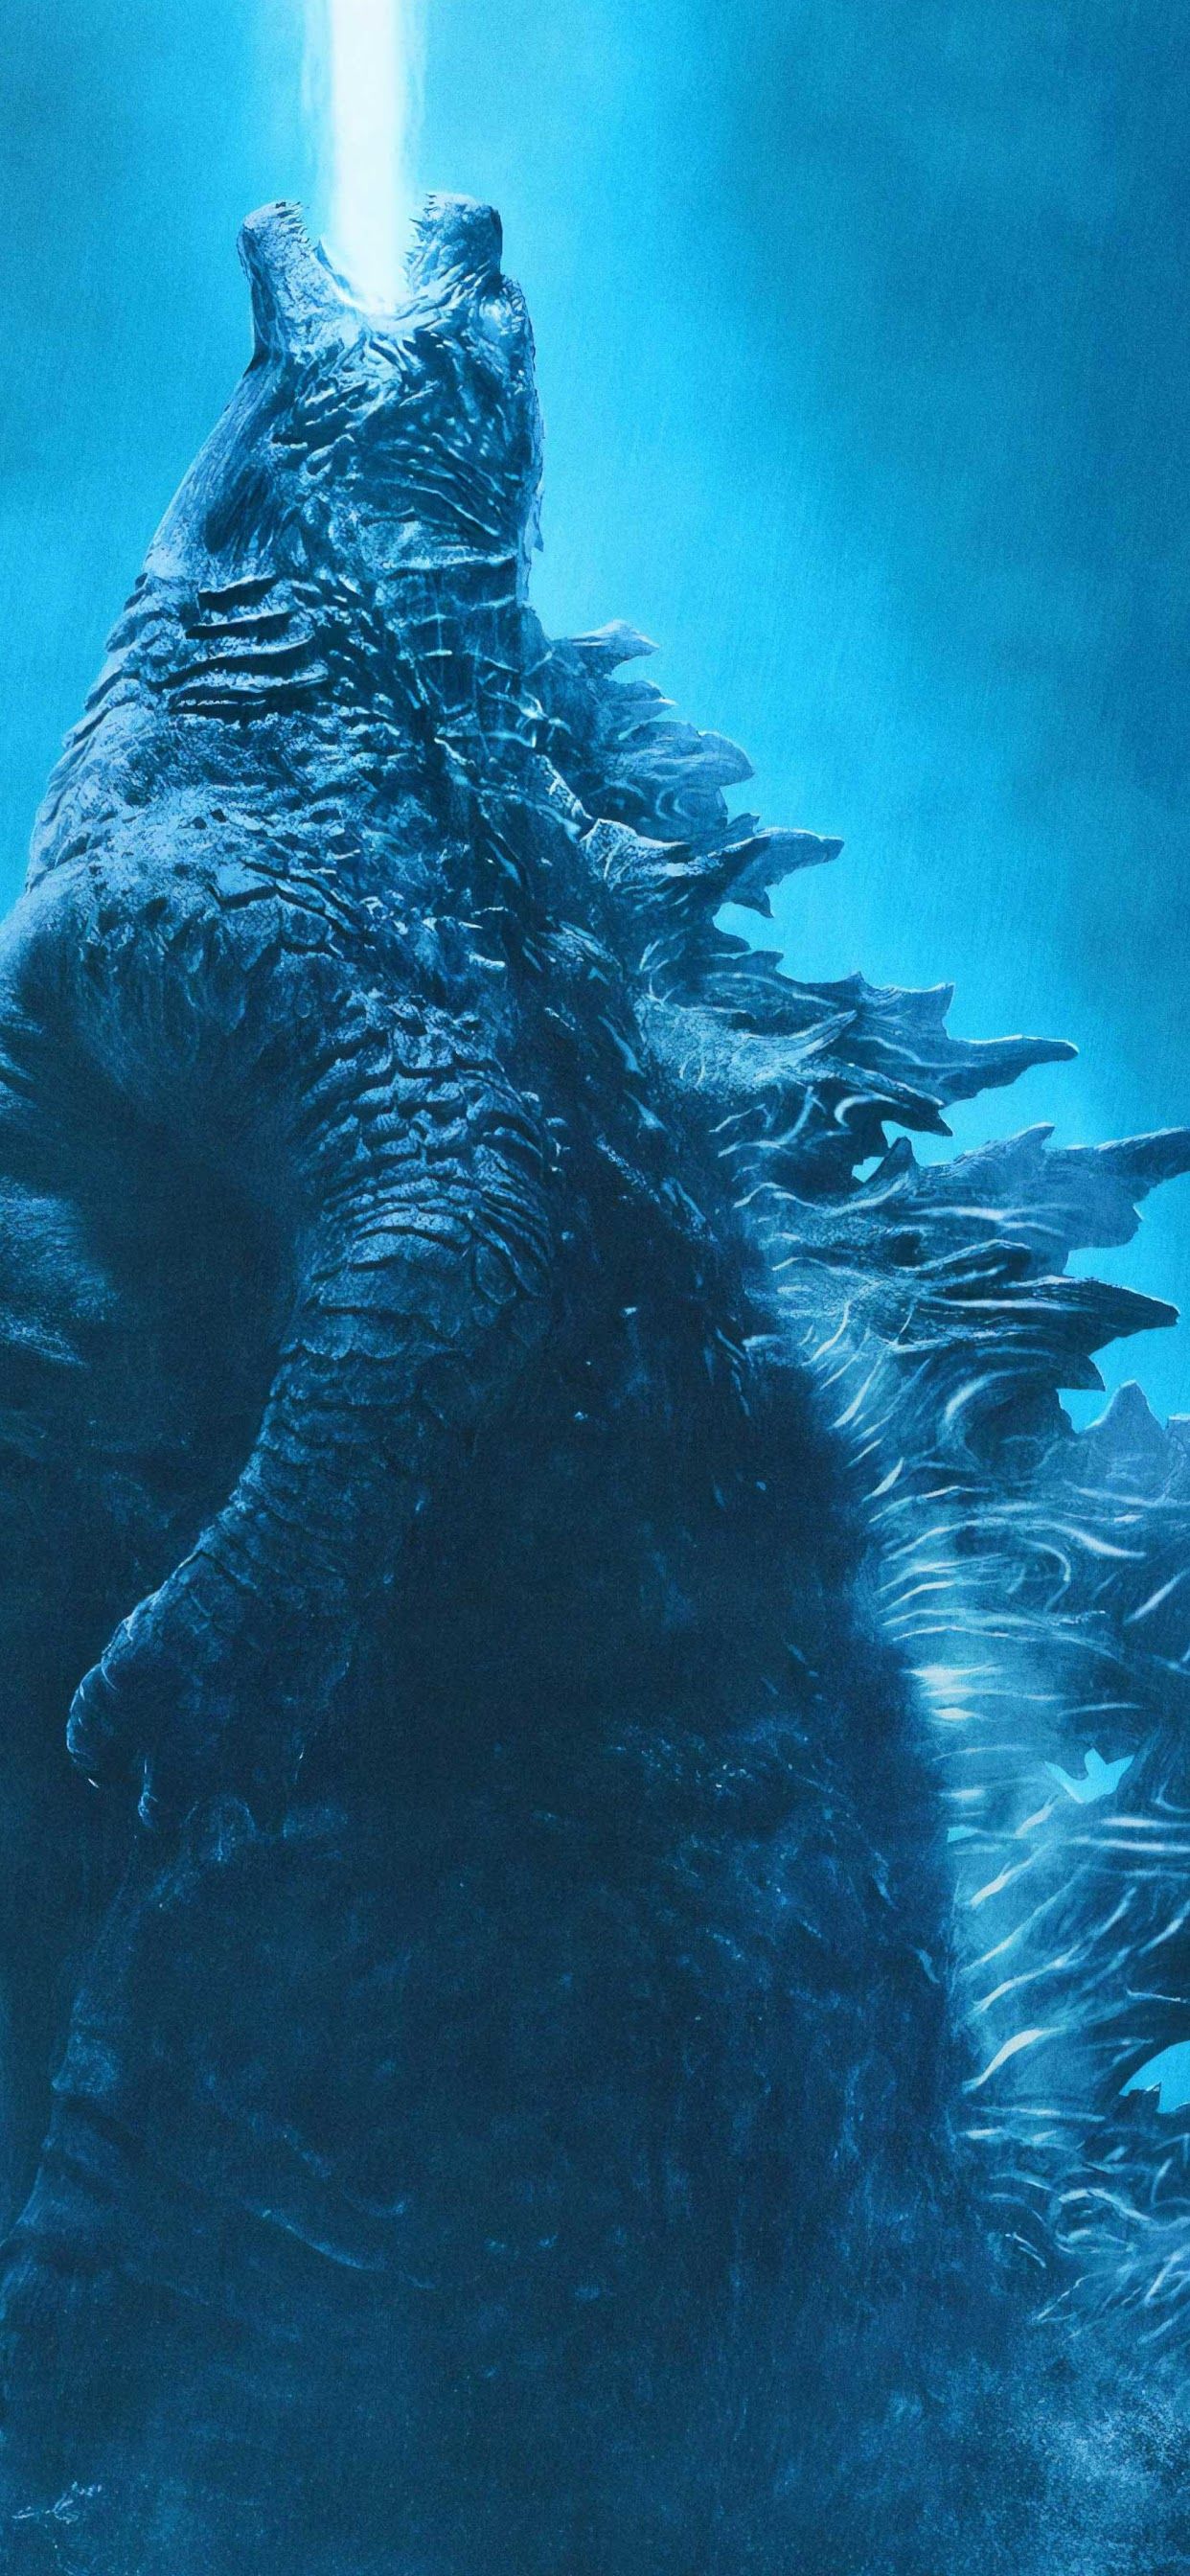 1080p 4k HD wallpaper for iphone 6: Godzilla Wallpaper For iPhone